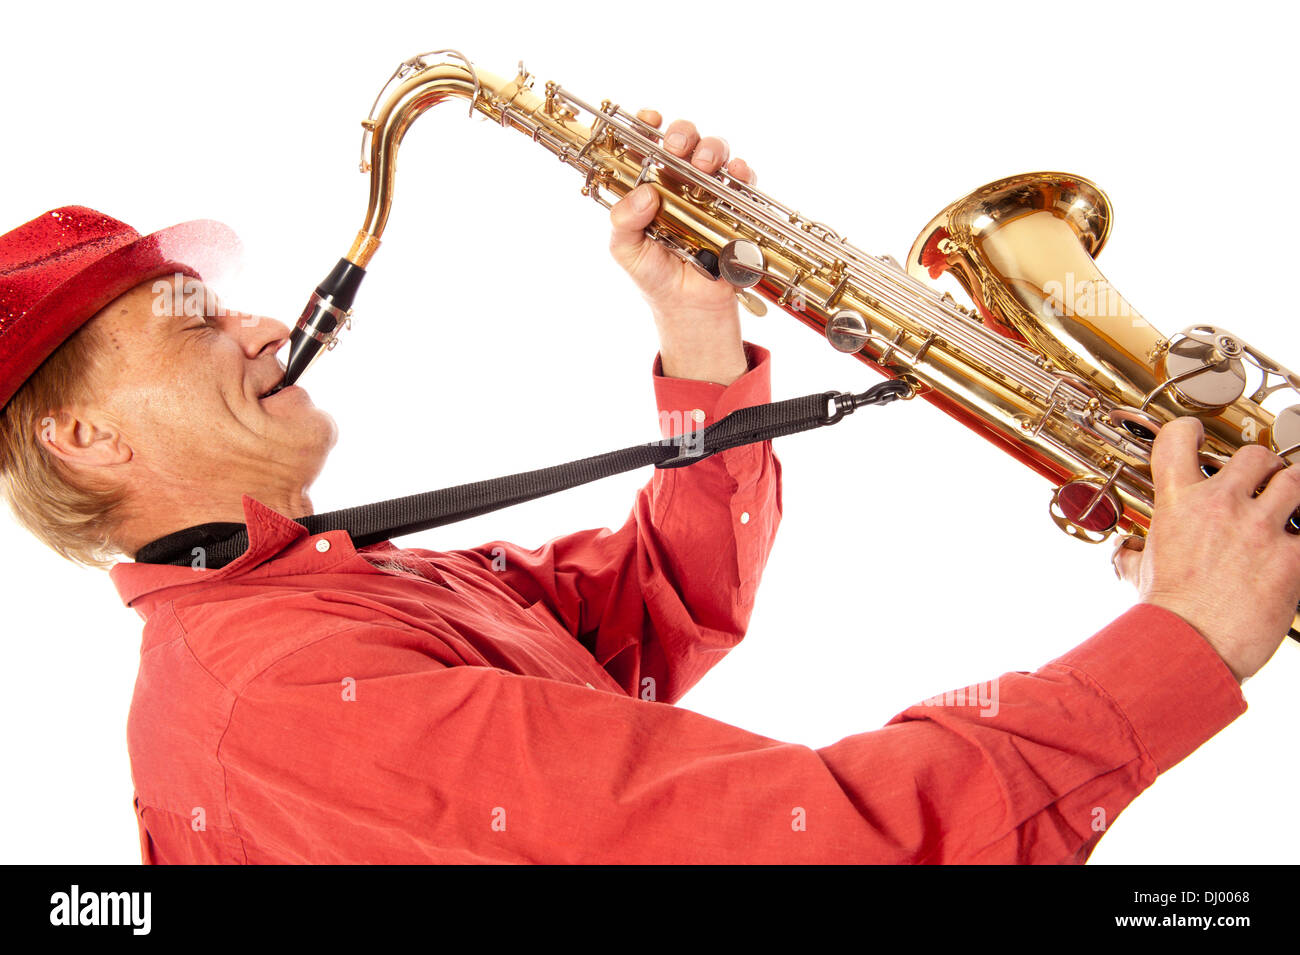 Male performer playing a brass tenor saxophone with silver valves and pearl buttons with expression Stock Photo